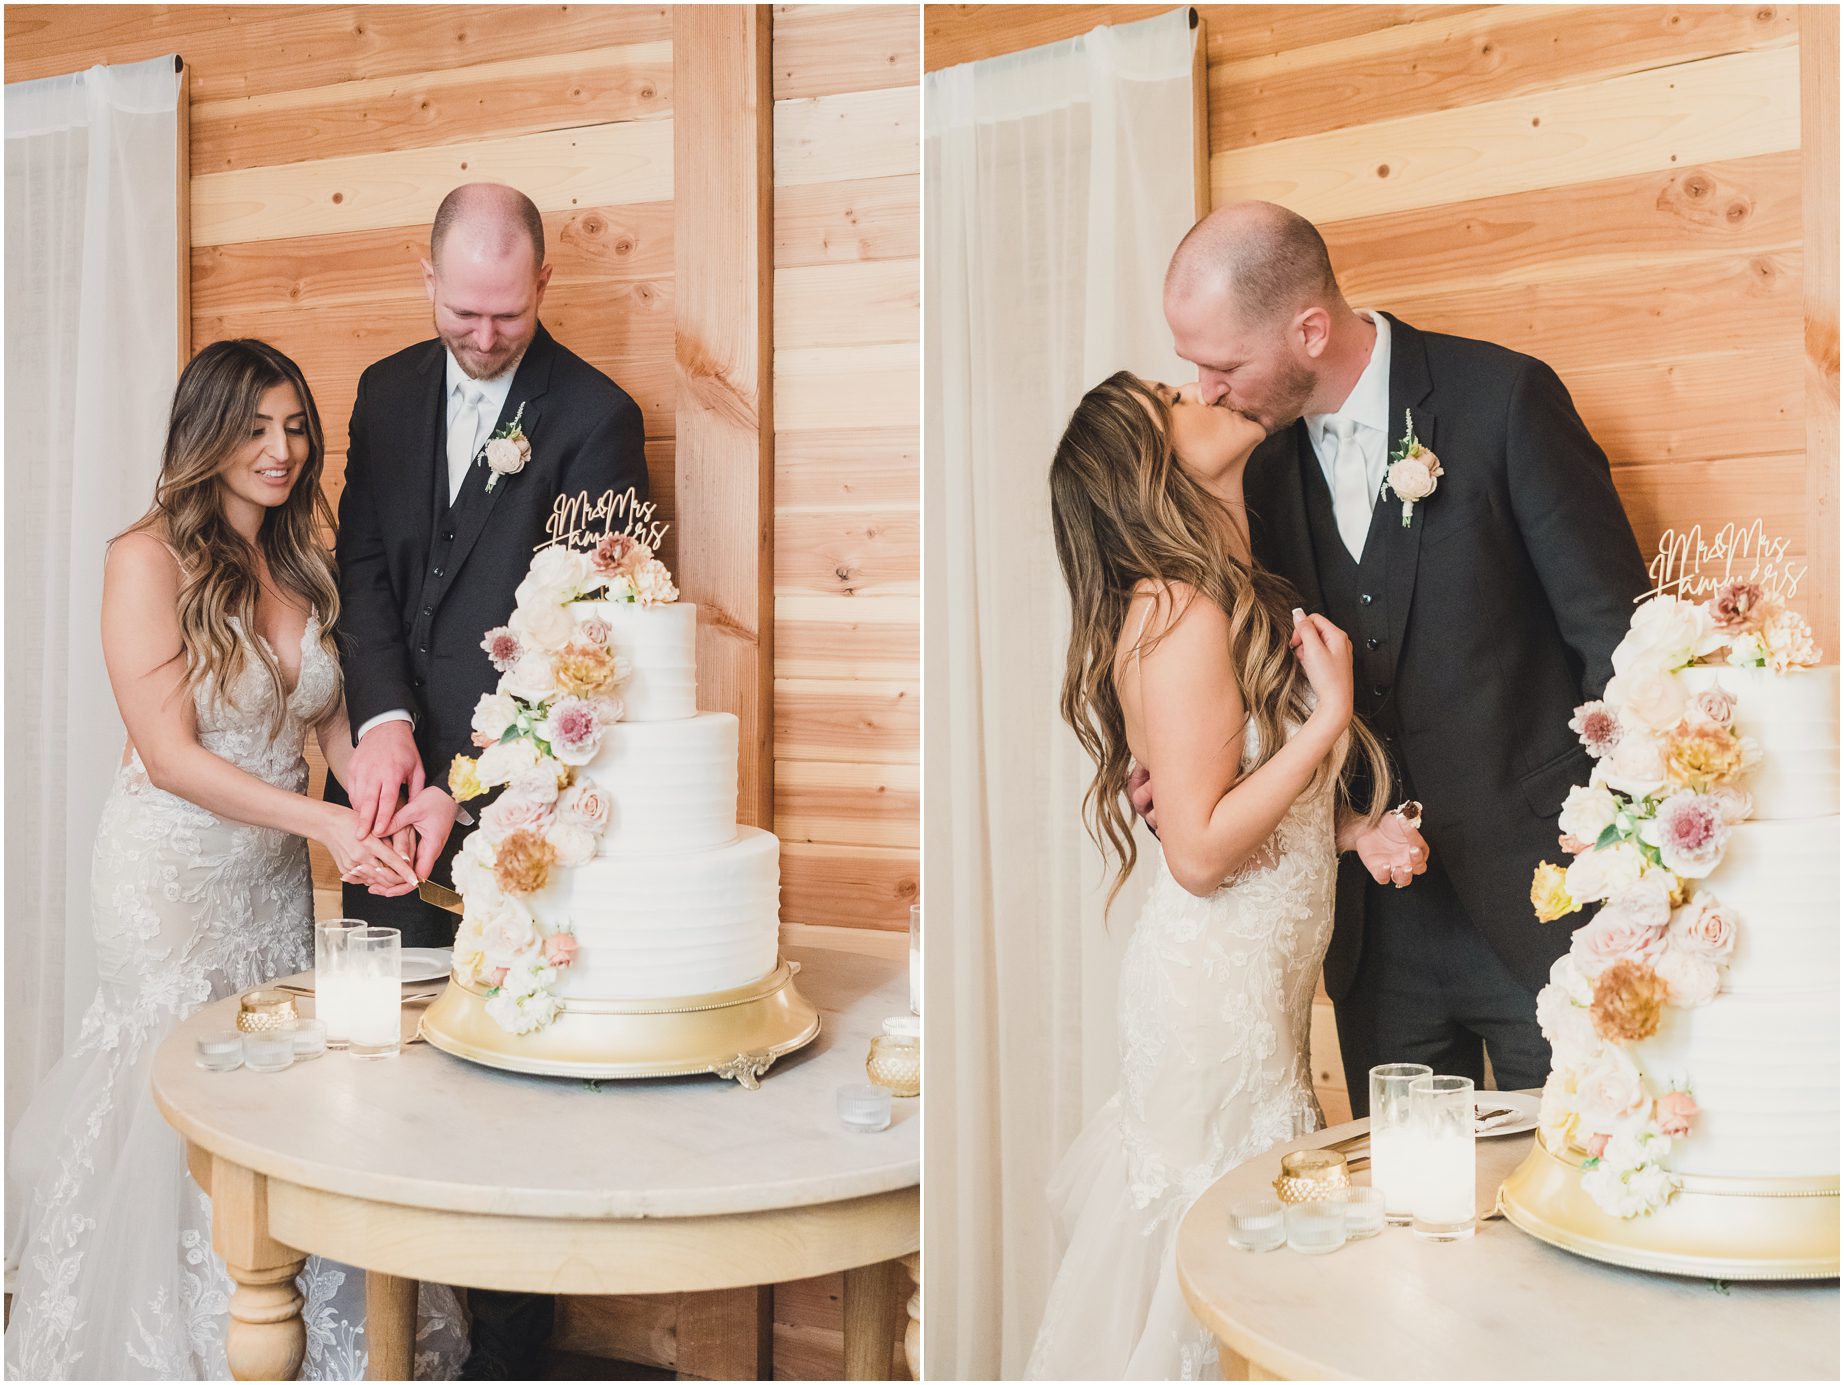 A bride and groom cut their cake and kiss during their Oak Glen wedding